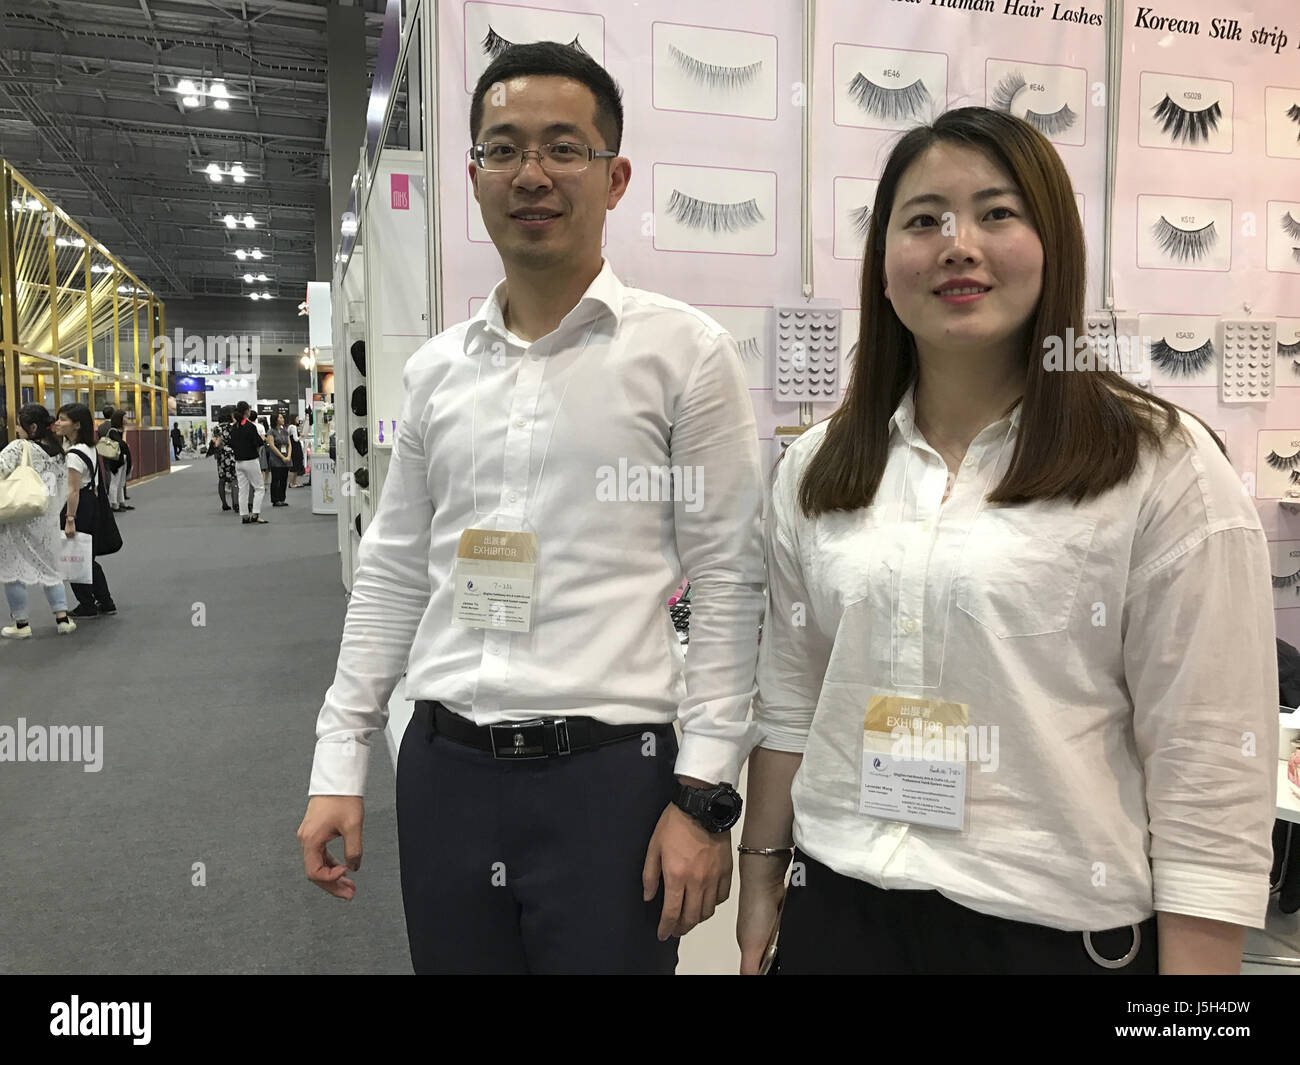 May 16, 2017 - Tokyo, Japan - (right) Lavender Wong and James Yu of China stand at Qingdao Hairbeauty Arts and Crafts Co., Ltd. booth during the Tokyo Nail Forum 2017 on Tuesday May 16, 2017. Photo by: Ramiro Agustin Vargas Tabares (Credit Image: © Ramiro Agustin Vargas Tabares via ZUMA Wire) Stock Photo